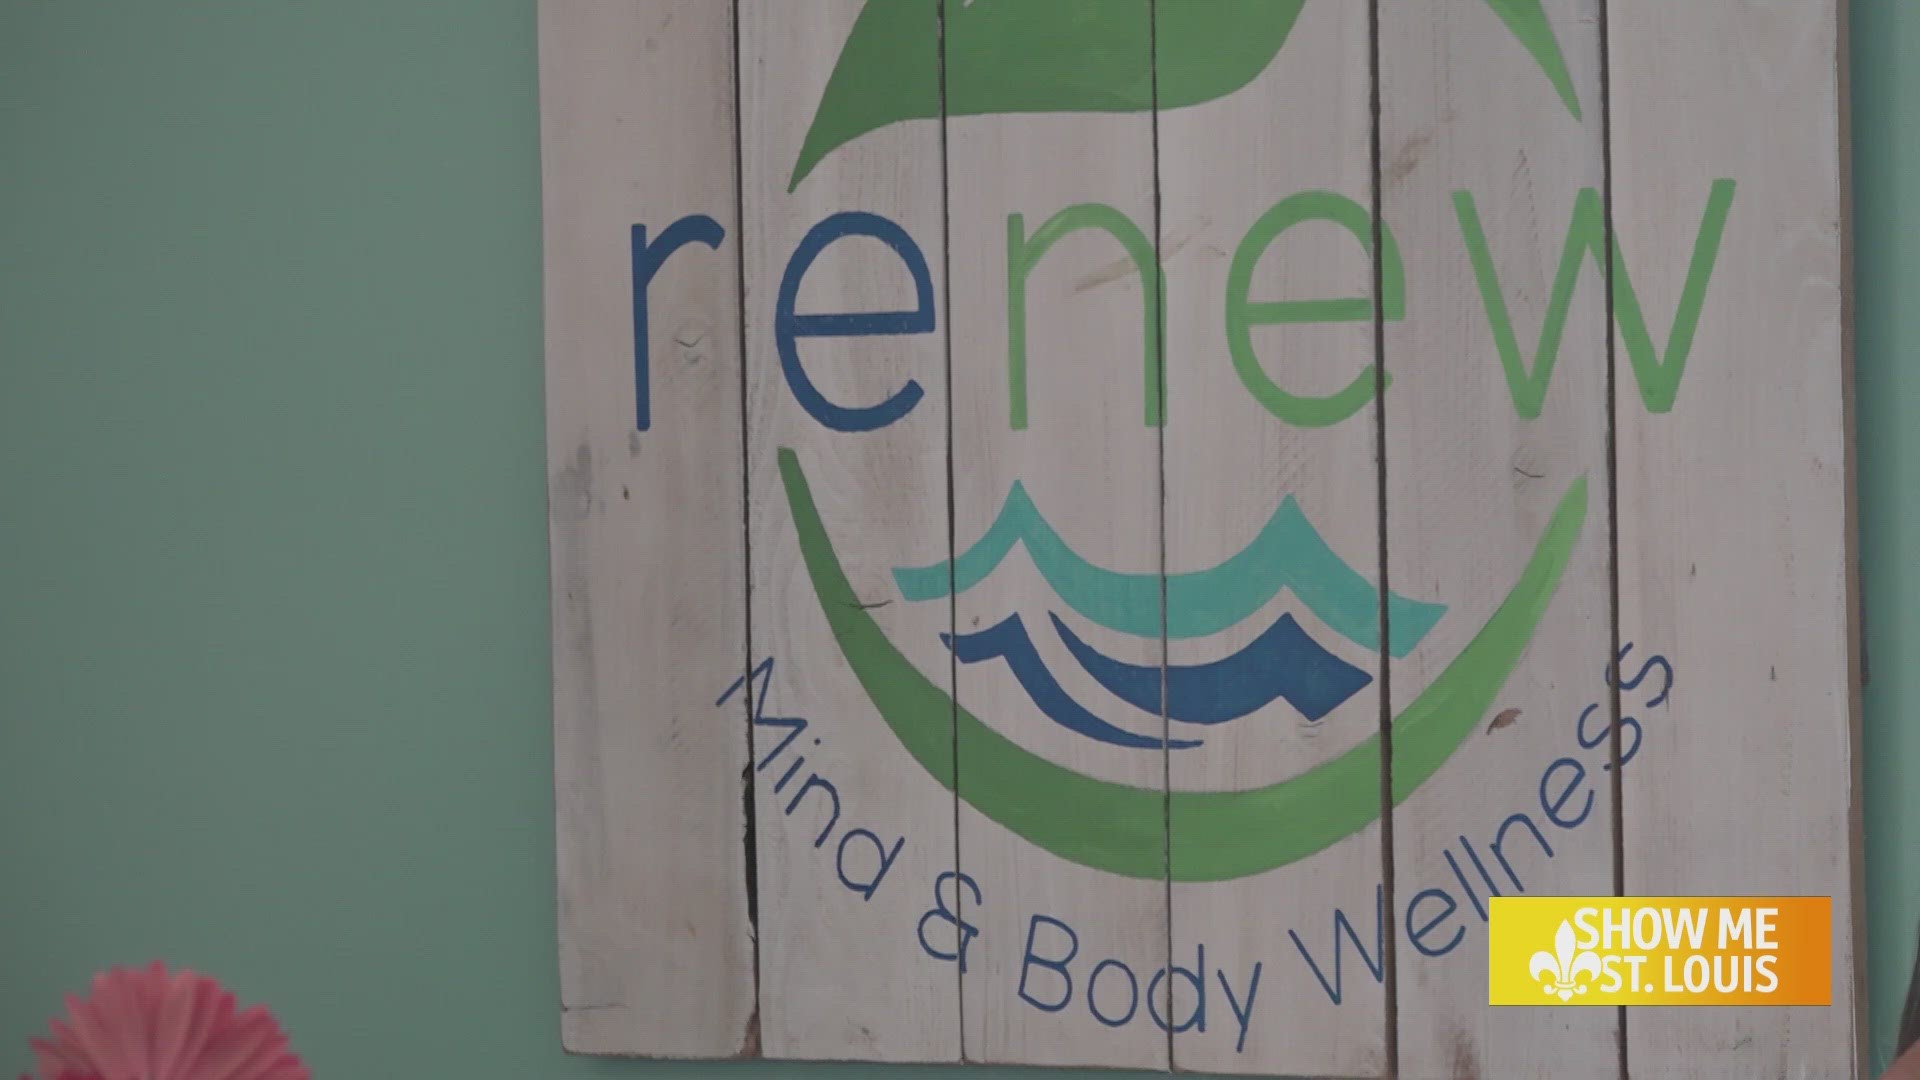 Renew Mind and Body Wellness is a total body holistic health center with a diverse array of therapeutic modalities for both mind and body.